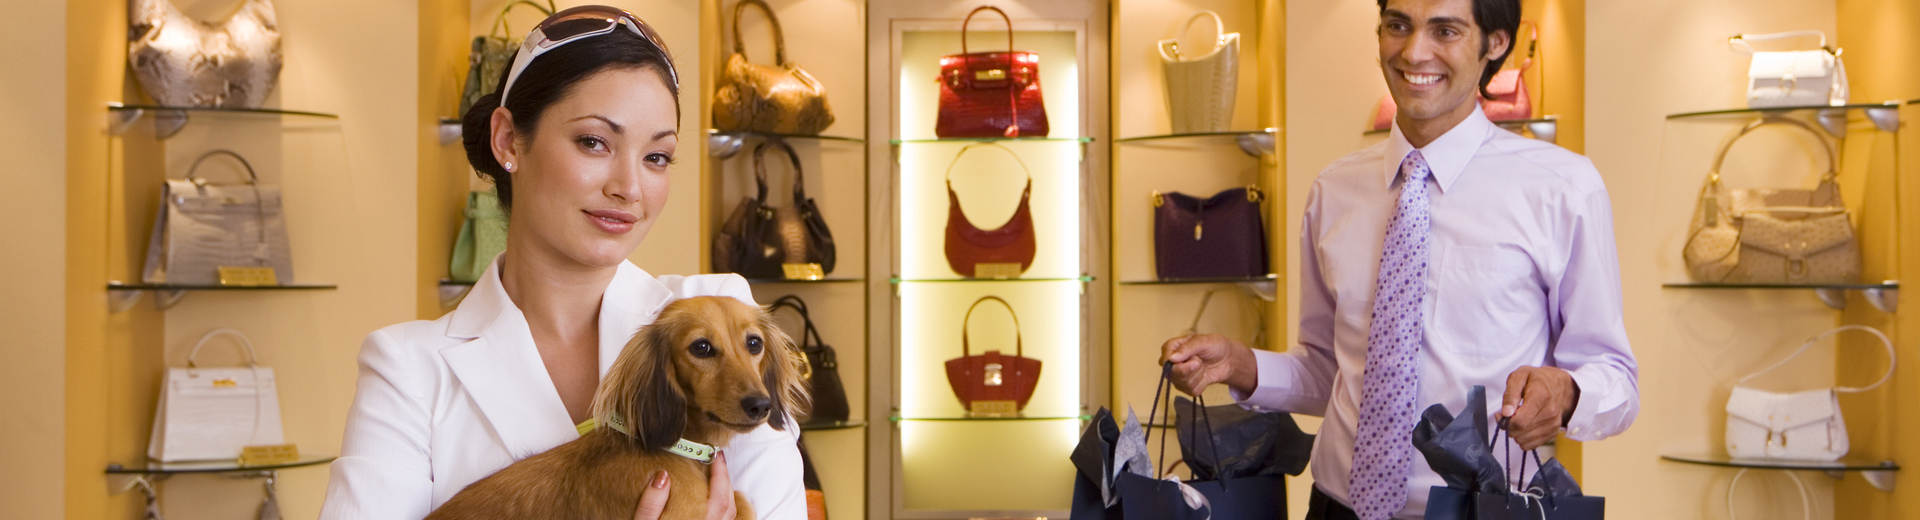 5 VIP Services Luxury Shoppers Get That We Want Too